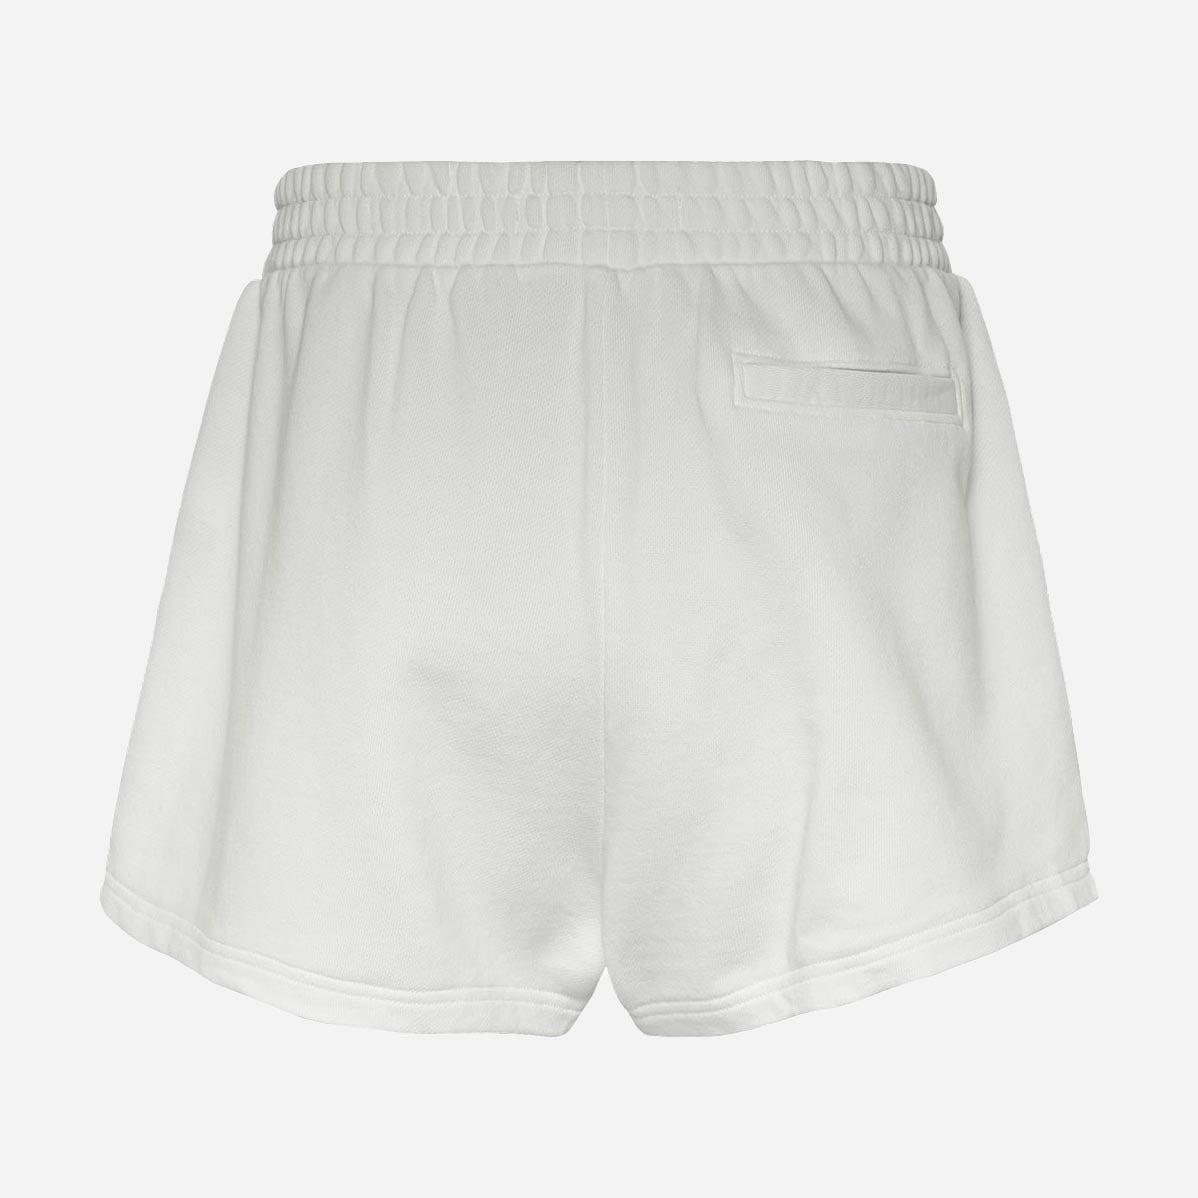 Tommy Jeans Women's Essential Short - White